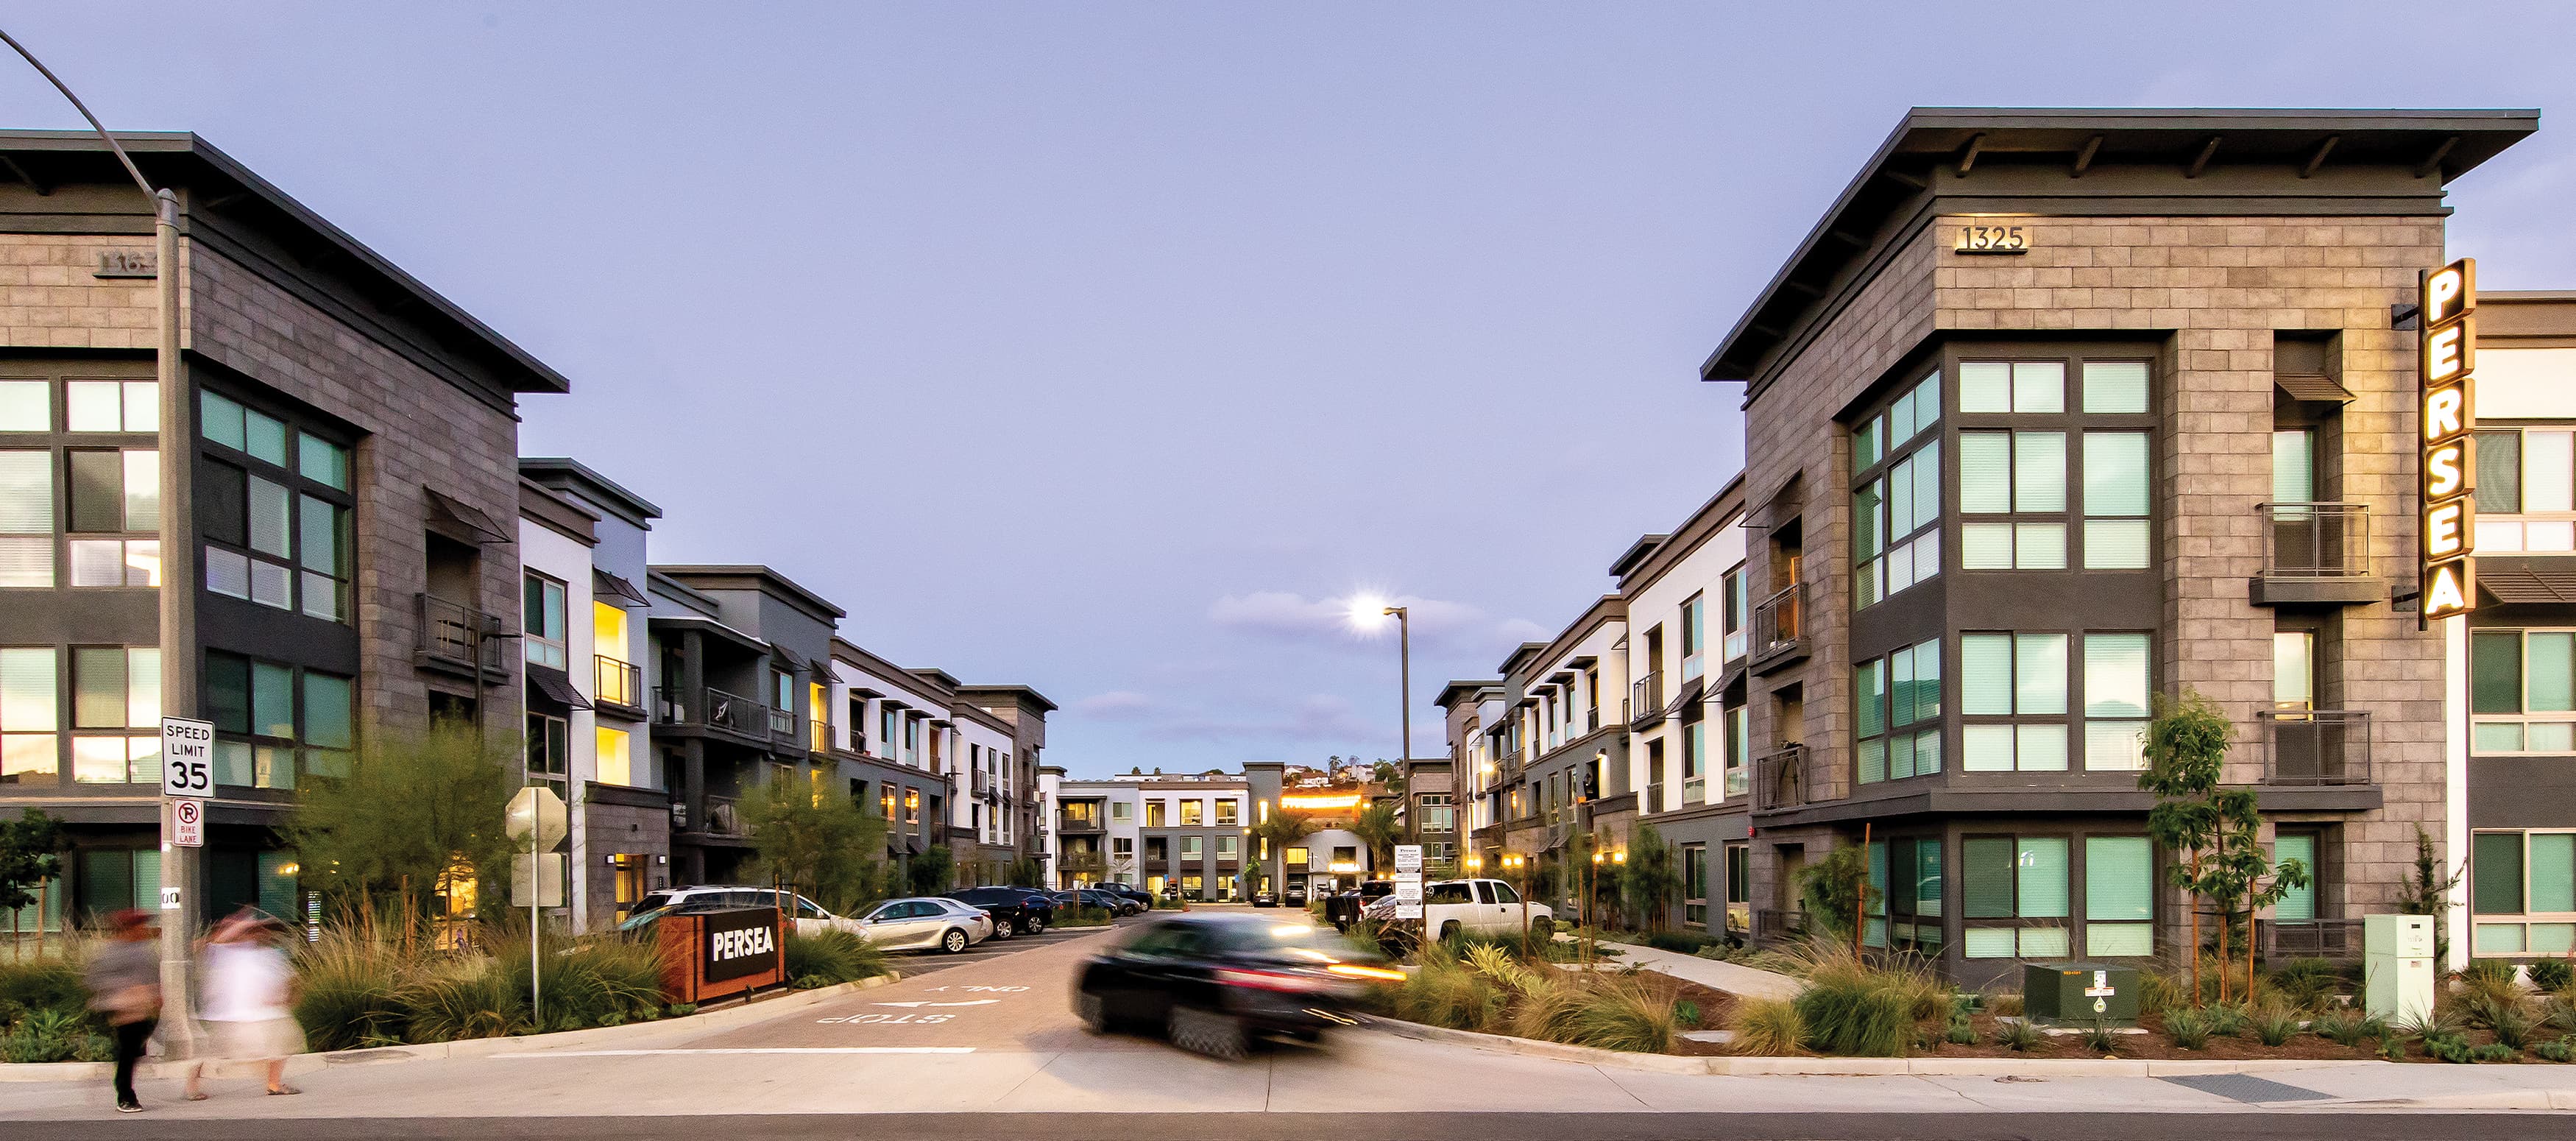 Persea is a Southern California apartment community located in North County, San Diego. The design team was driven by Persea’s unique location in Vista, CA